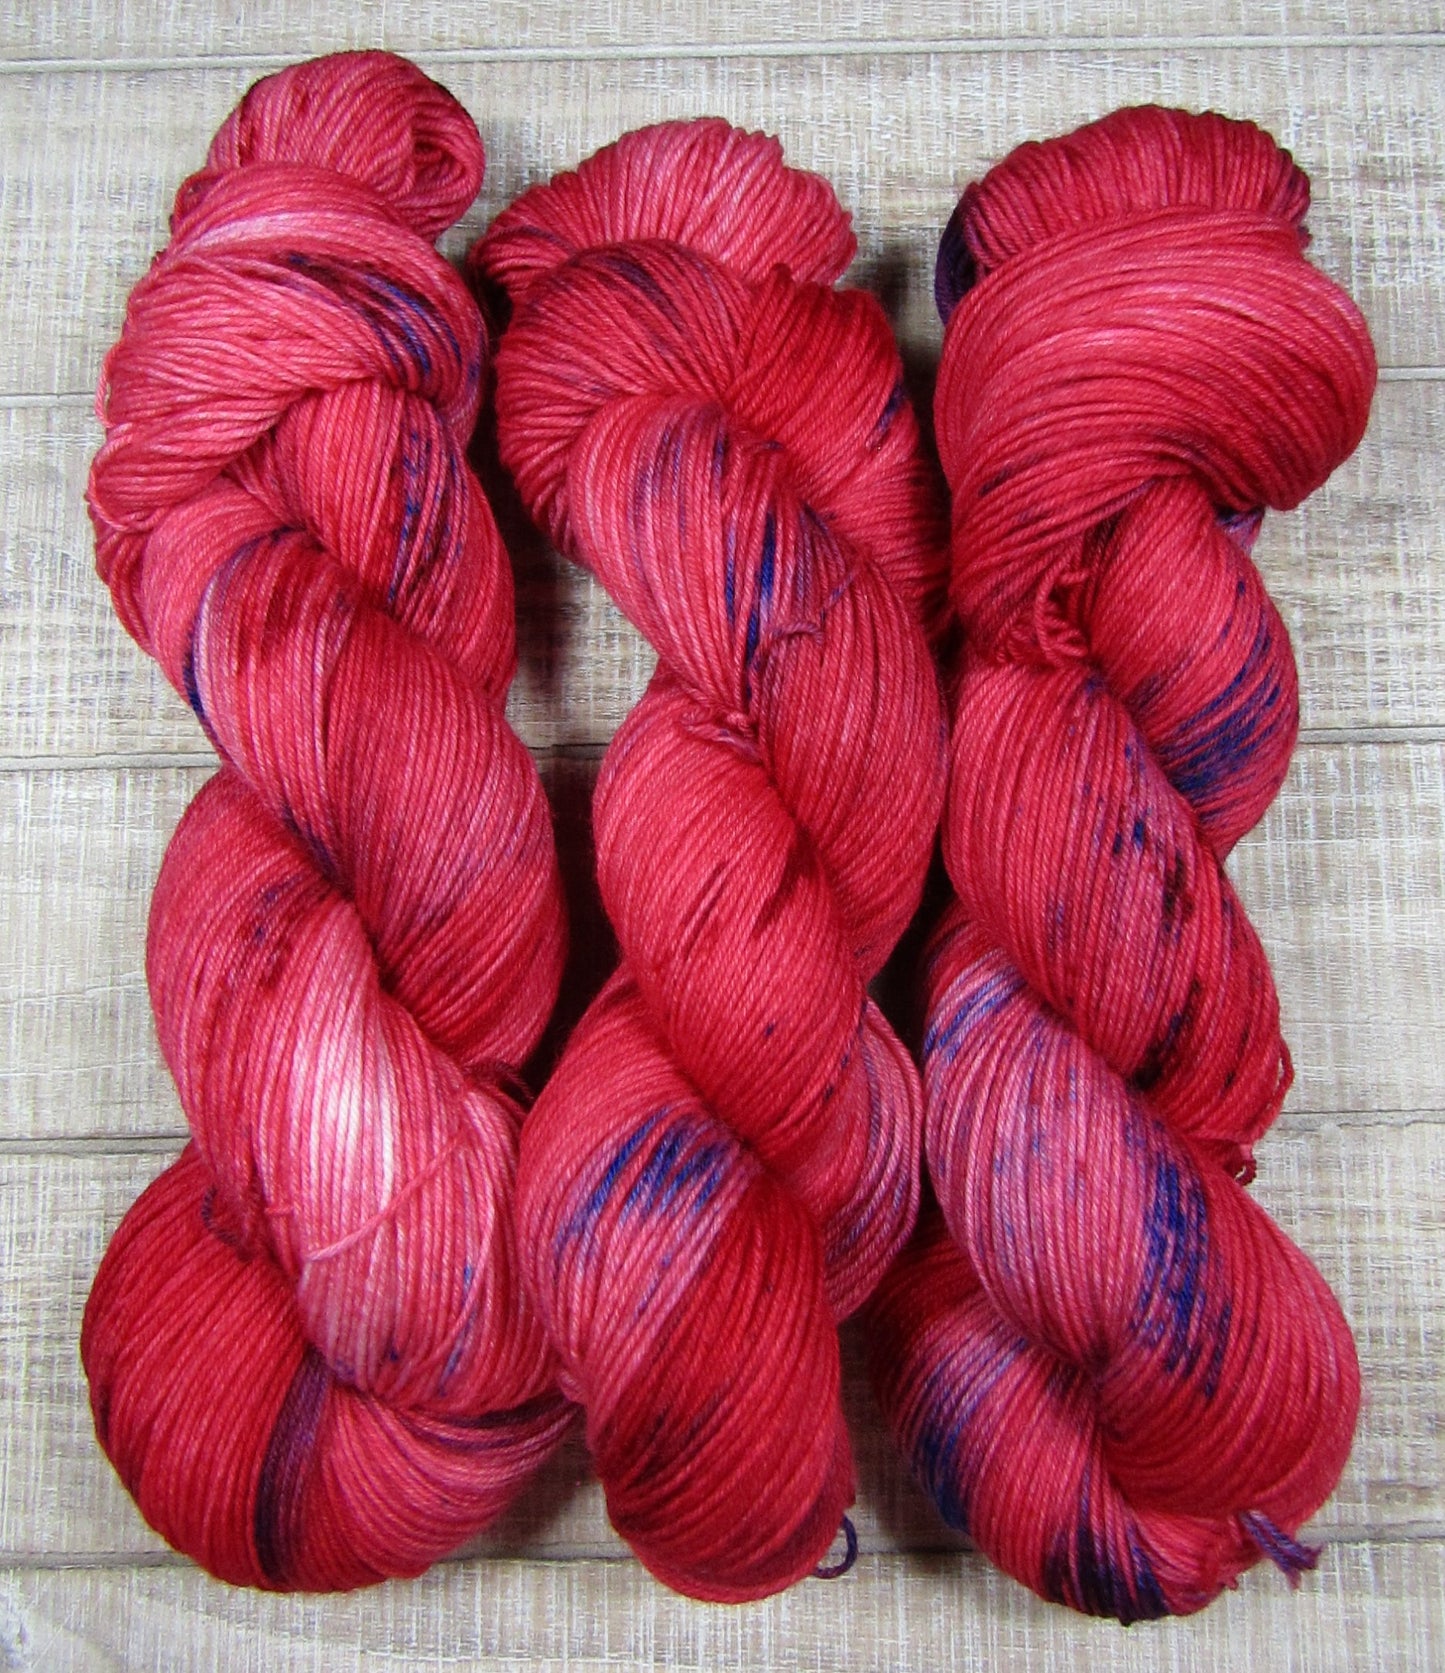 Hand-Dyed Yarn Scarlett Superwash Merino/Nylon is red with areas of blue and purple